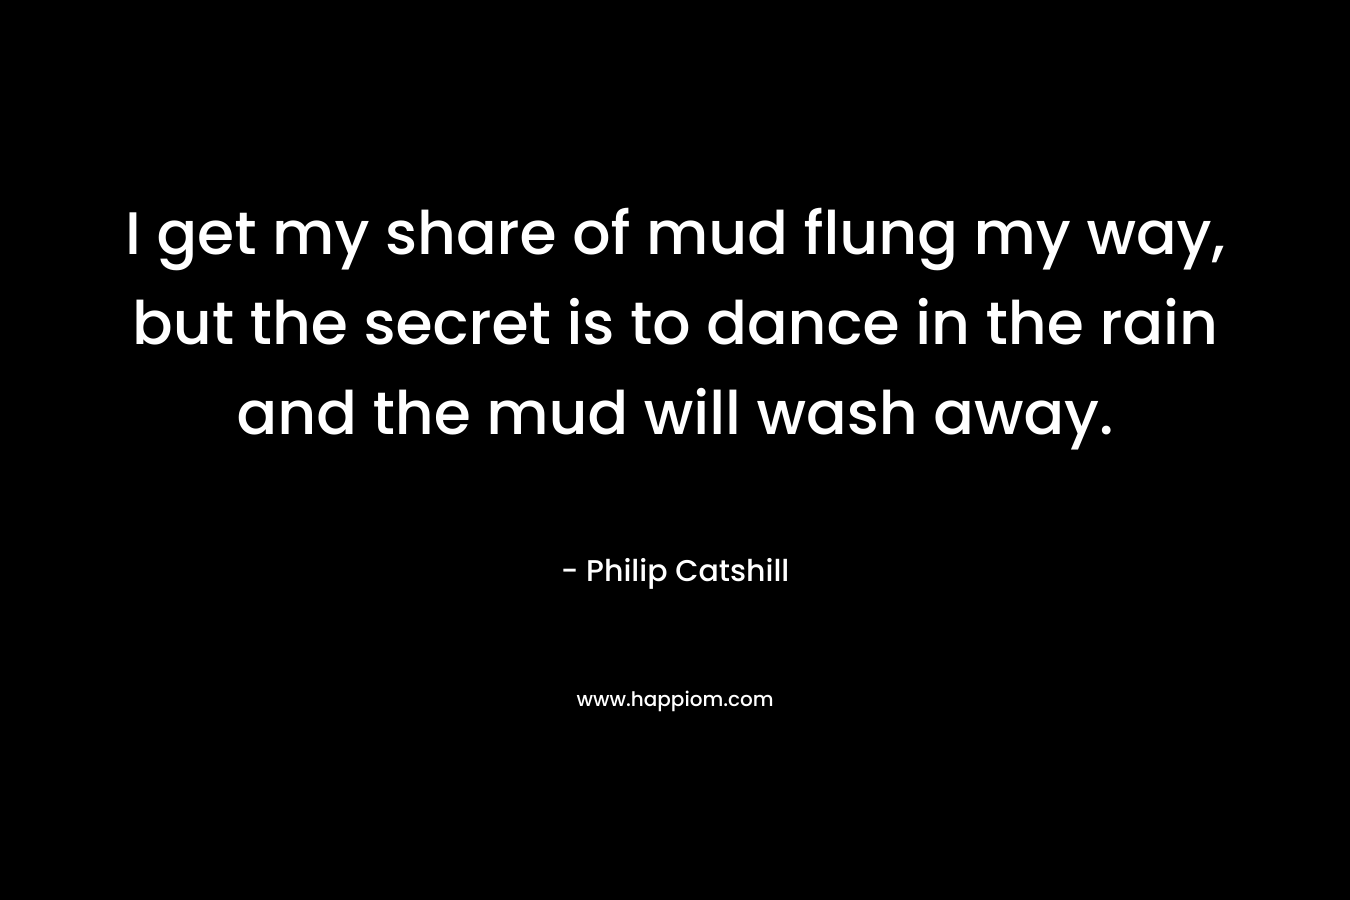 I get my share of mud flung my way, but the secret is to dance in the rain and the mud will wash away. – Philip Catshill